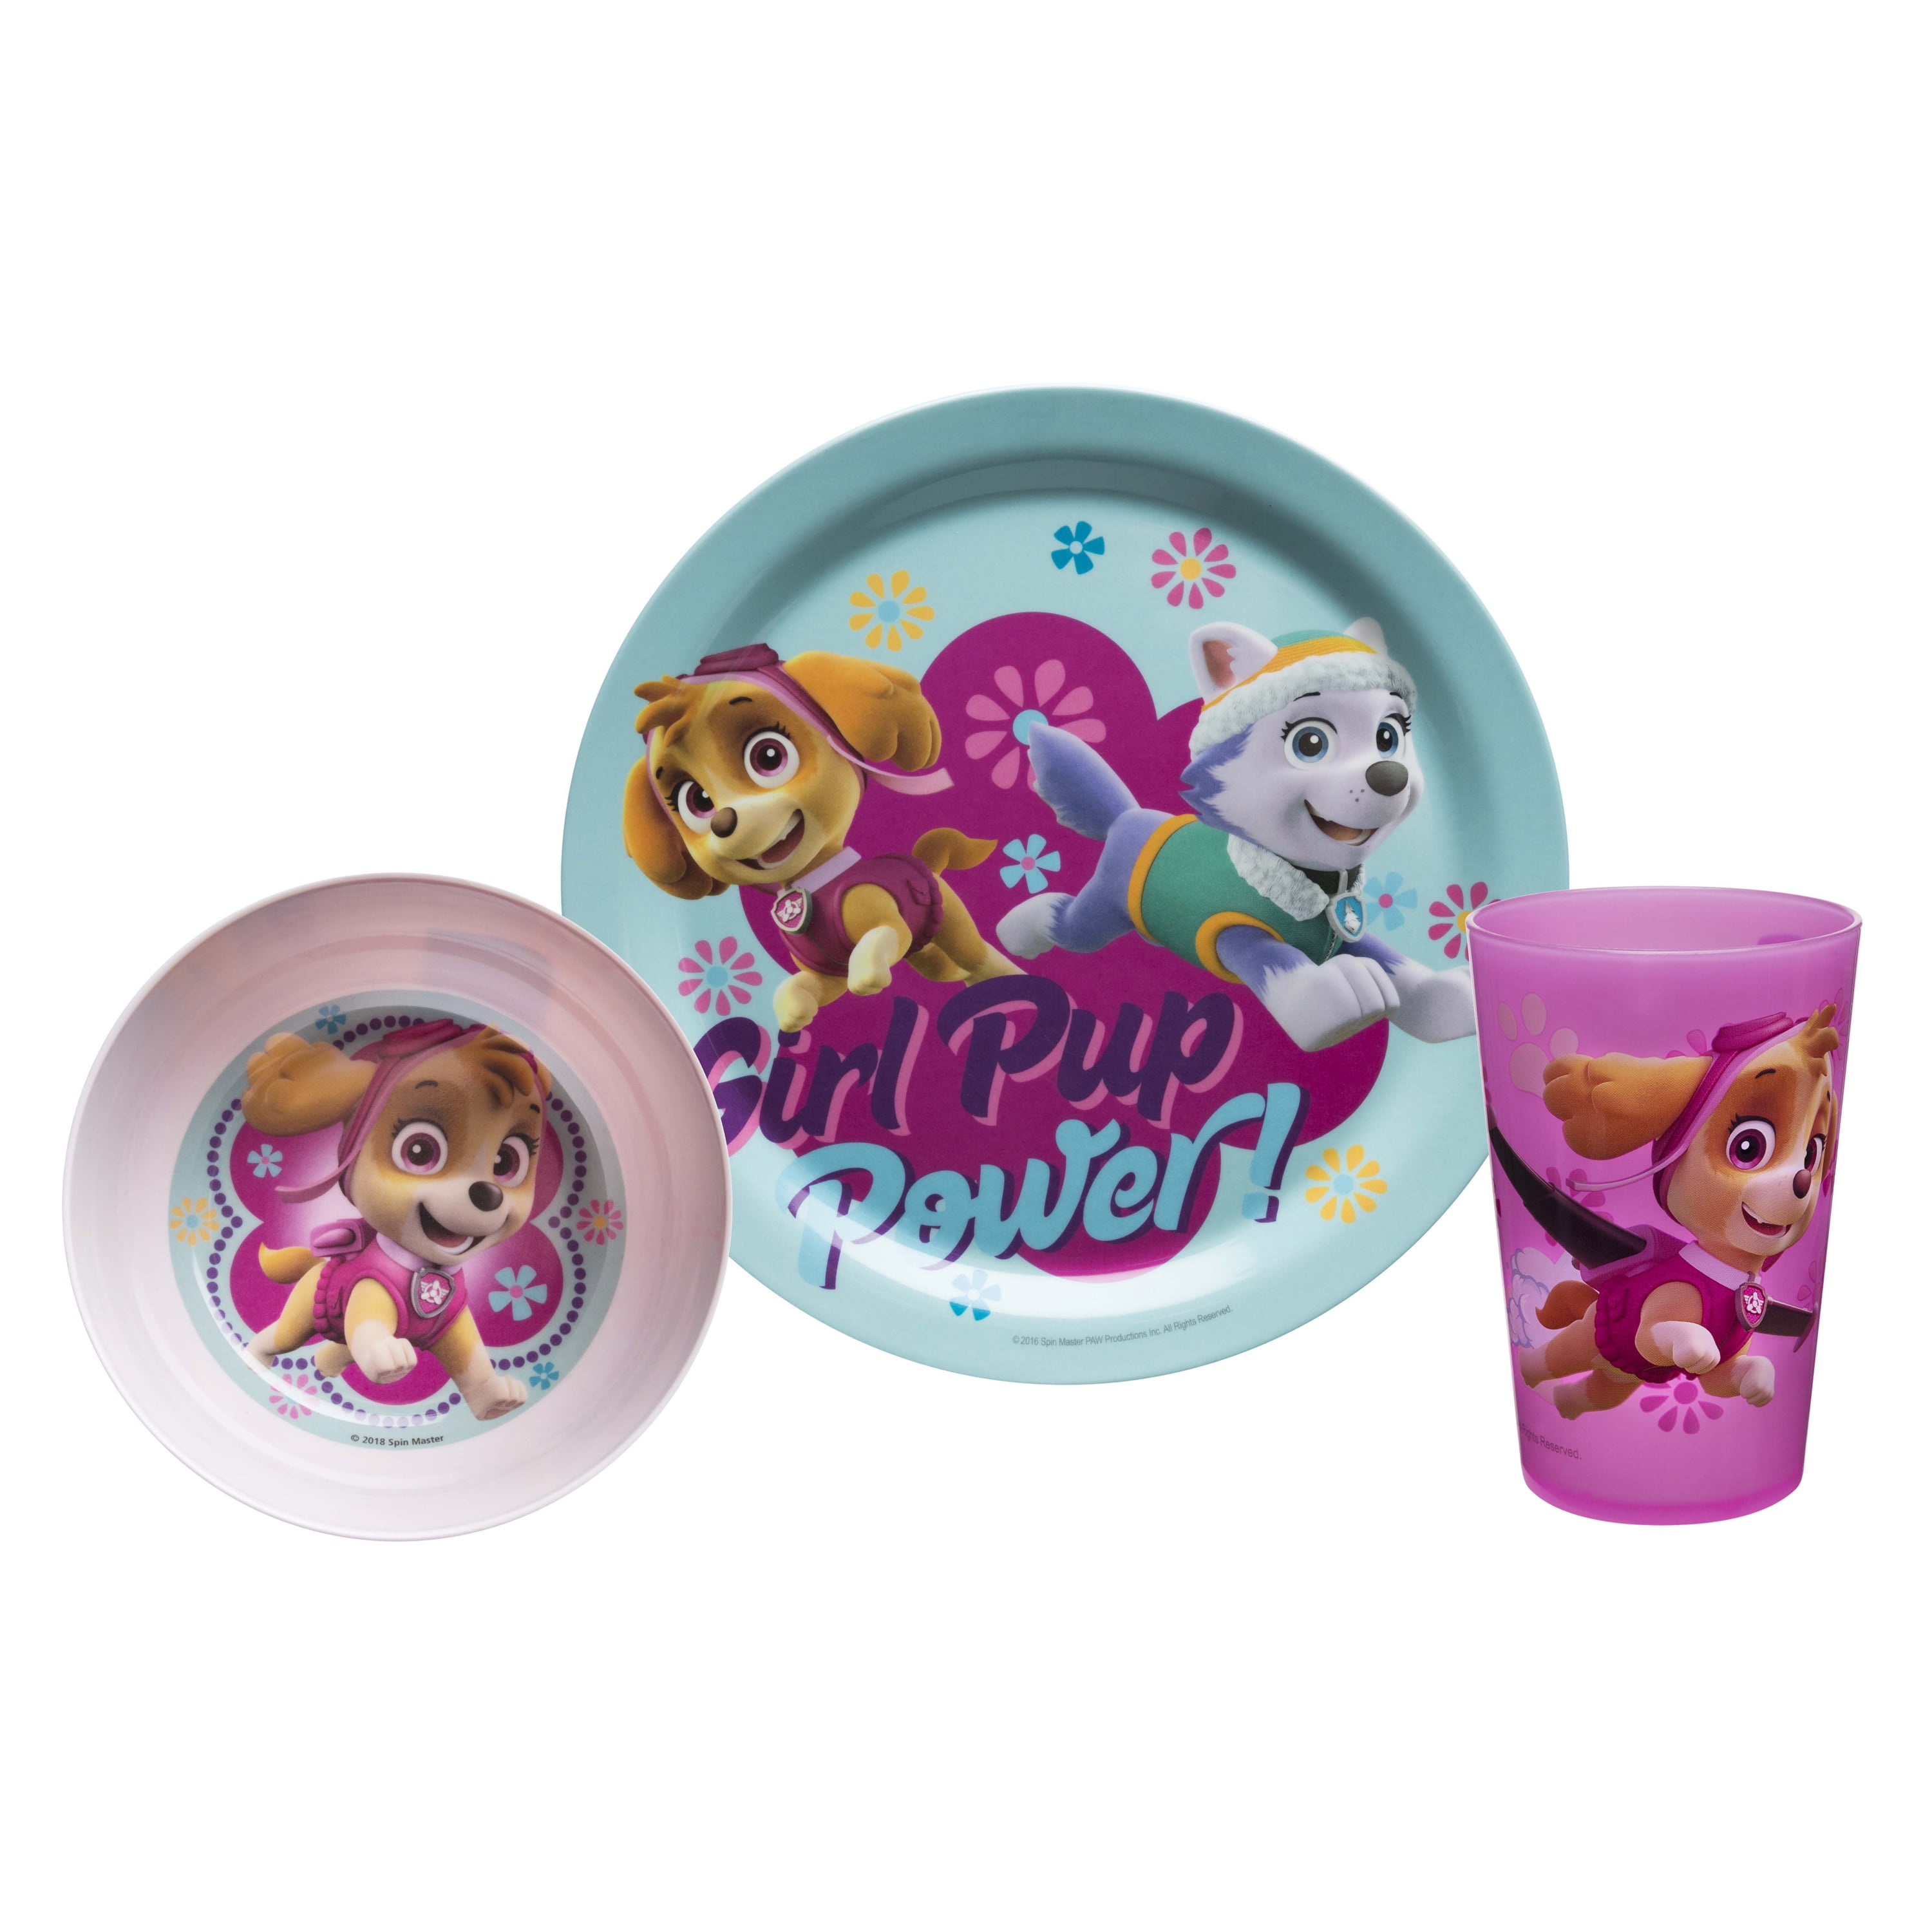 Includes Plate Bowl and Cup 3-Piece Crockery Set for Children Dishwasher Safe Ceramic POS 29463088 Breakfast Set with Paw Patrol Motif 